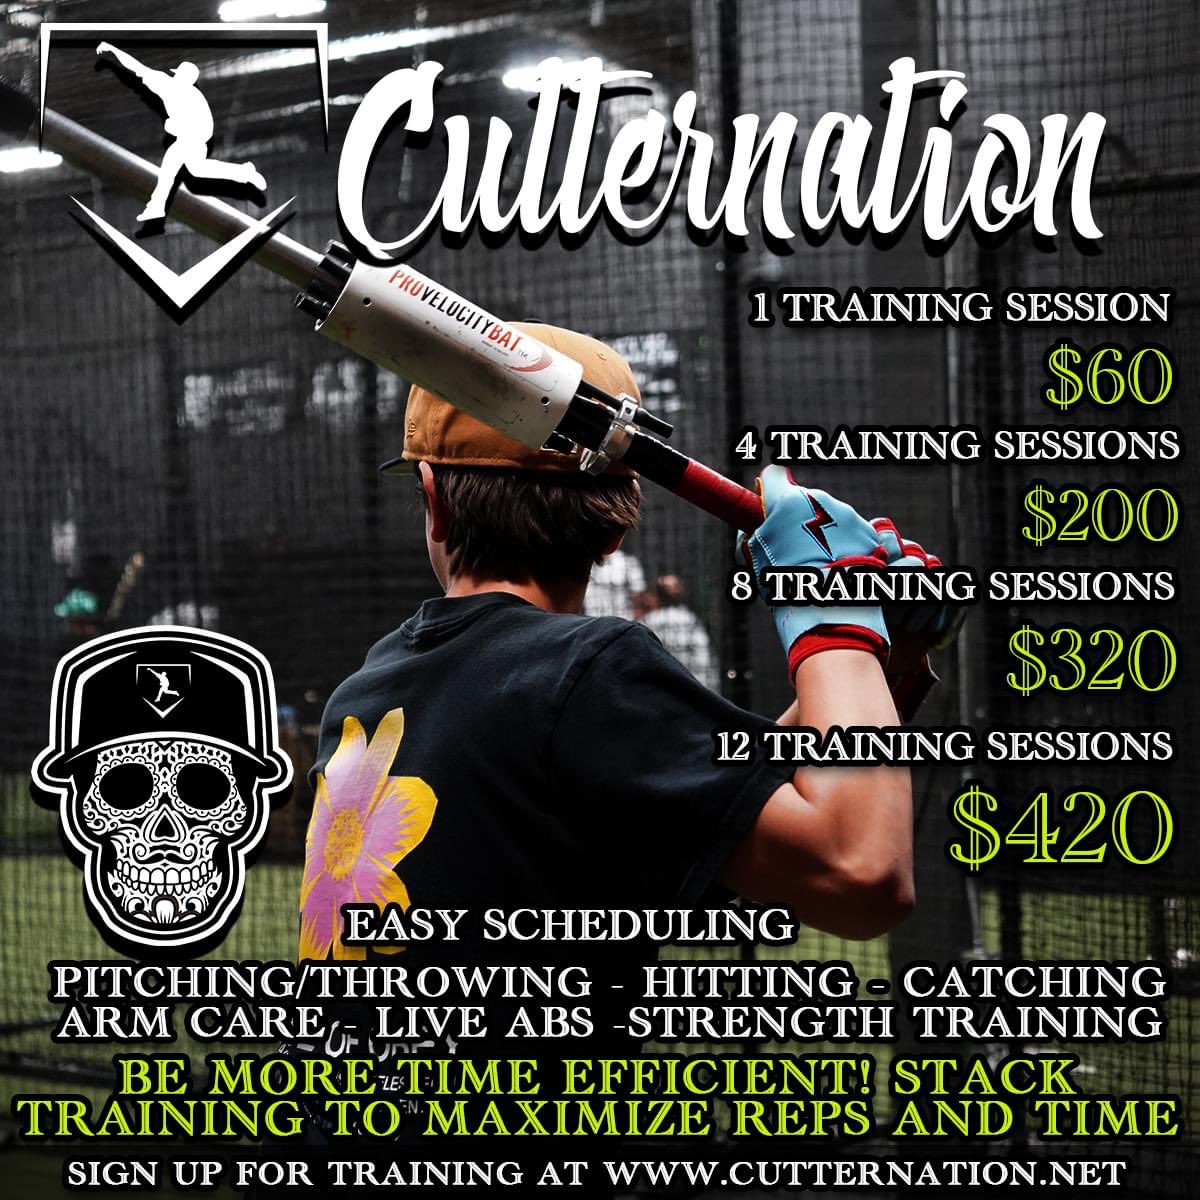 🚀 Elevate your game with CutterNation Baseball Training! Discover: 🔥 Specialized training for pitching, hitting, fielding, and catching. 🏋️ Efficient stacking sessions for maximum progress. 📆 Flexible 7-day training options. 🔥 Live at bats 💼 Tailored packages and memberships